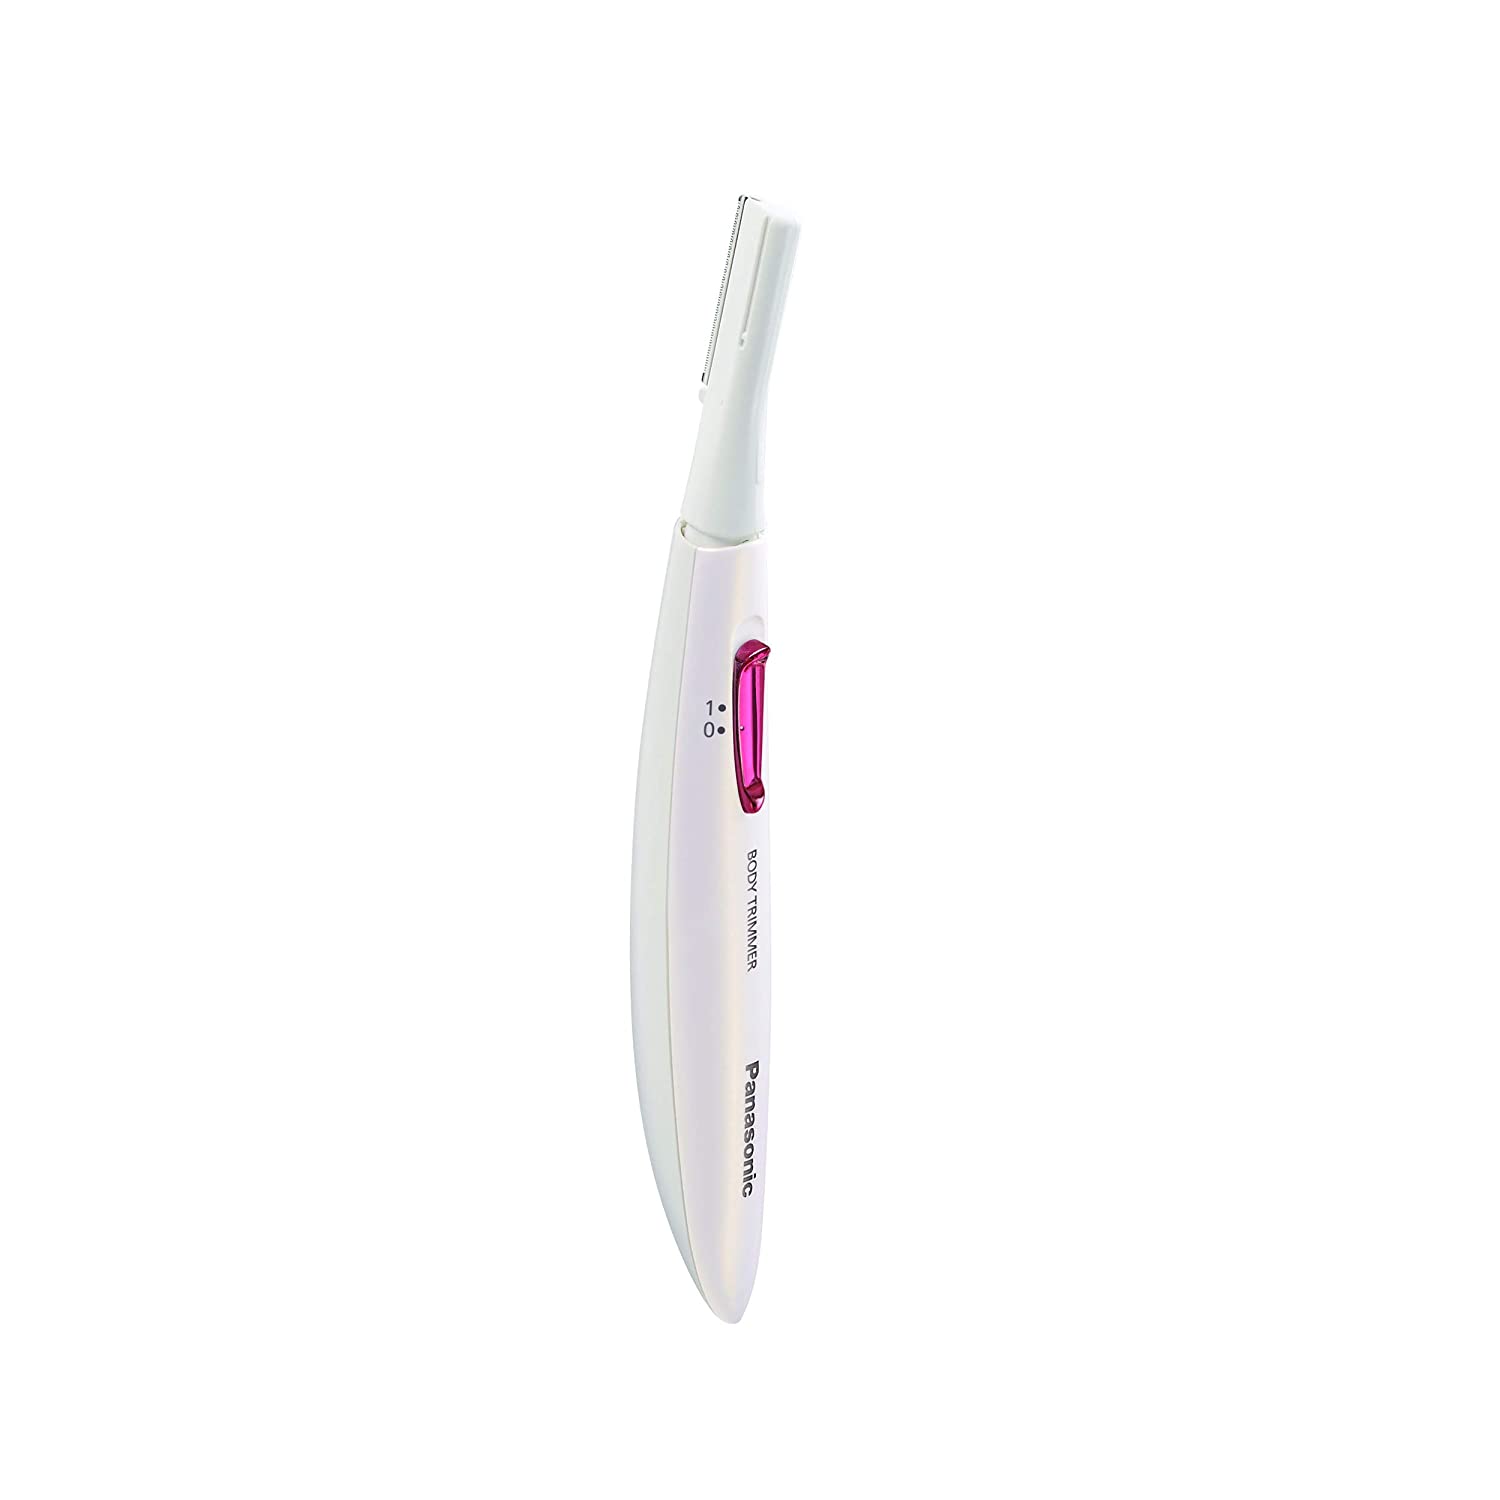 Panasonic Pivoting Head Body Trimmer Hair Removal Device